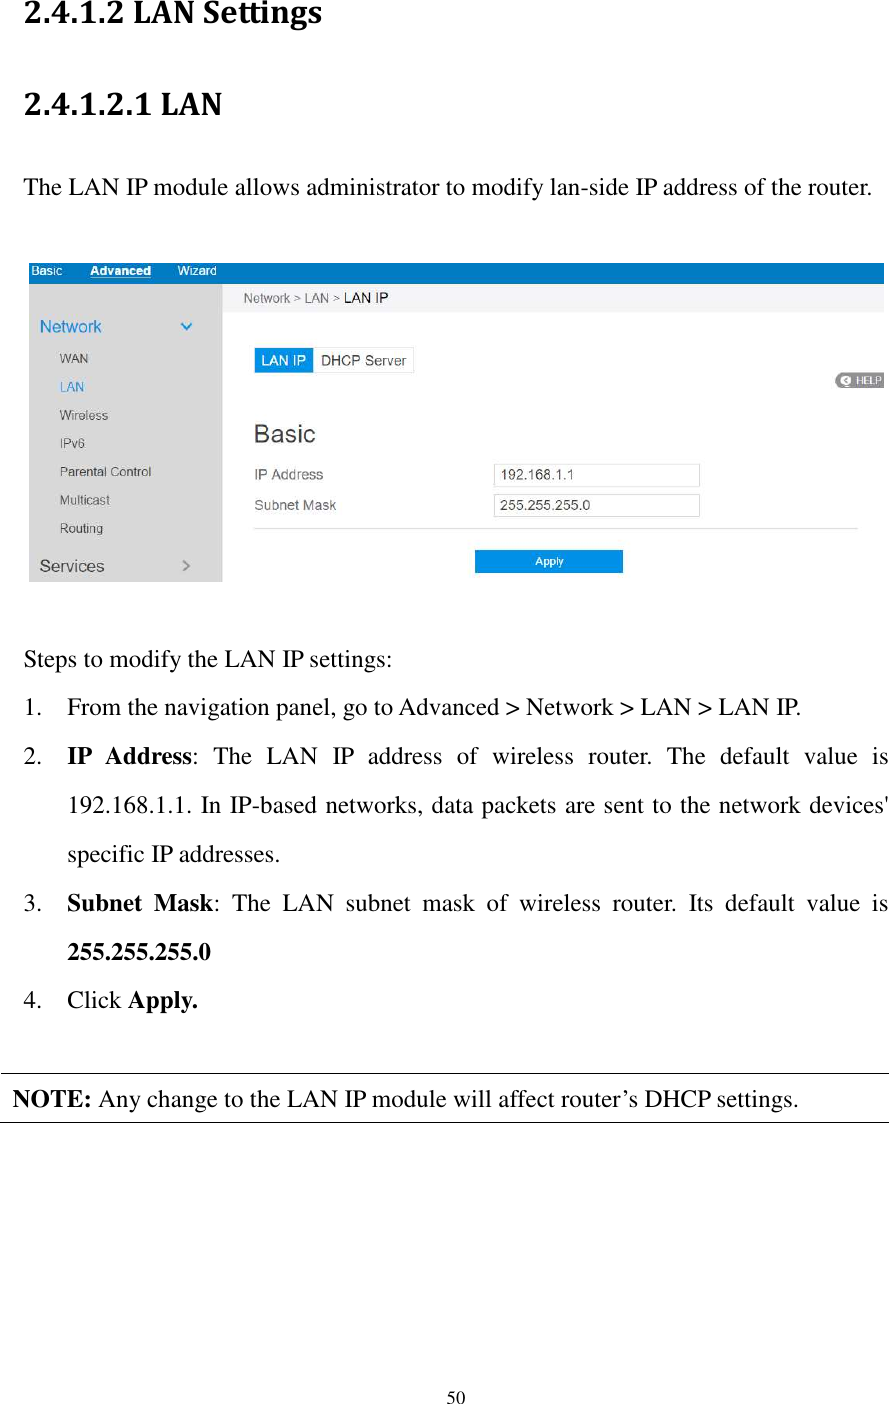  50  2.4.1.2 LAN Settings 2.4.1.2.1 LAN   The LAN IP module allows administrator to modify lan-side IP address of the router.      Steps to modify the LAN IP settings: 1. From the navigation panel, go to Advanced &gt; Network &gt; LAN &gt; LAN IP. 2. IP  Address:  The  LAN  IP  address  of  wireless  router.  The  default  value  is 192.168.1.1. In IP-based networks, data packets are sent to the network devices&apos; specific IP addresses. 3. Subnet  Mask:  The  LAN  subnet  mask  of  wireless  router.  Its  default  value  is 255.255.255.0 4. Click Apply.  NOTE: Any change to the LAN IP module will affect router’s DHCP settings.  